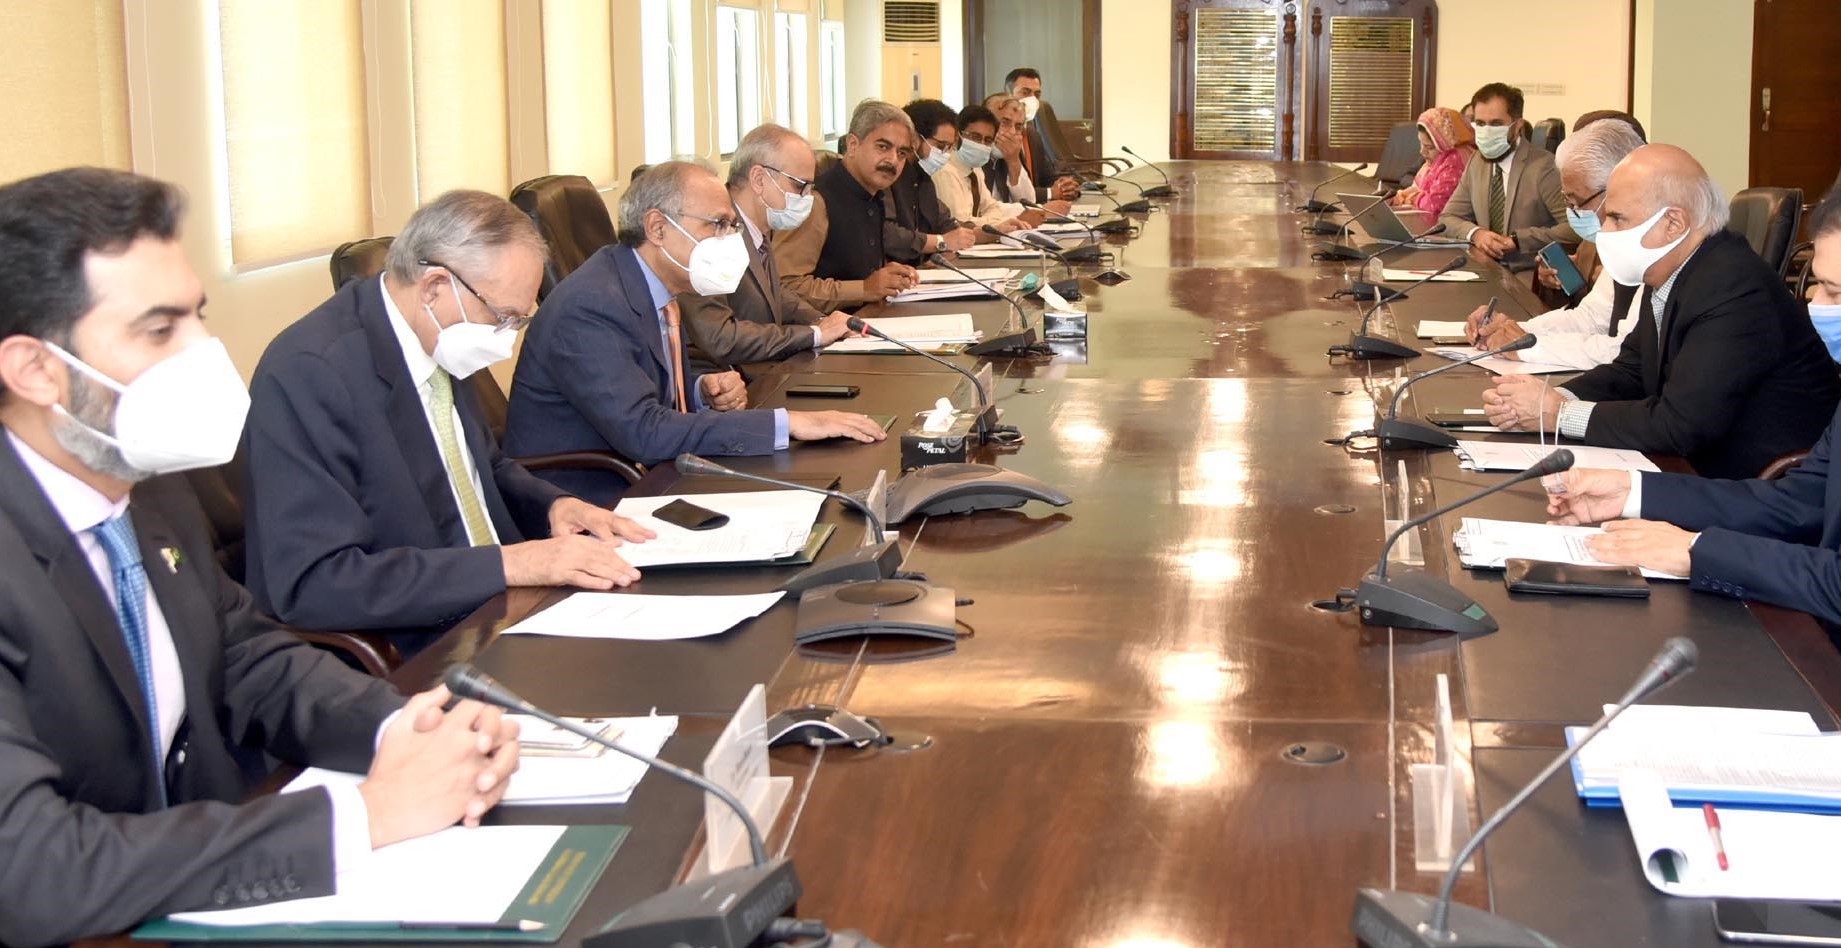 ADVISER TO THE PRIME MINISTER ON FINANCE AND REVENUE, DR. ABDUL HAFEEZ SHAIKH CHAIRING A MEETING OF THE MONETARY & FISCAL POLICIES COORDINATION BOARD IN ISLAMABAD ON SEPTEMBER 24, 2020.